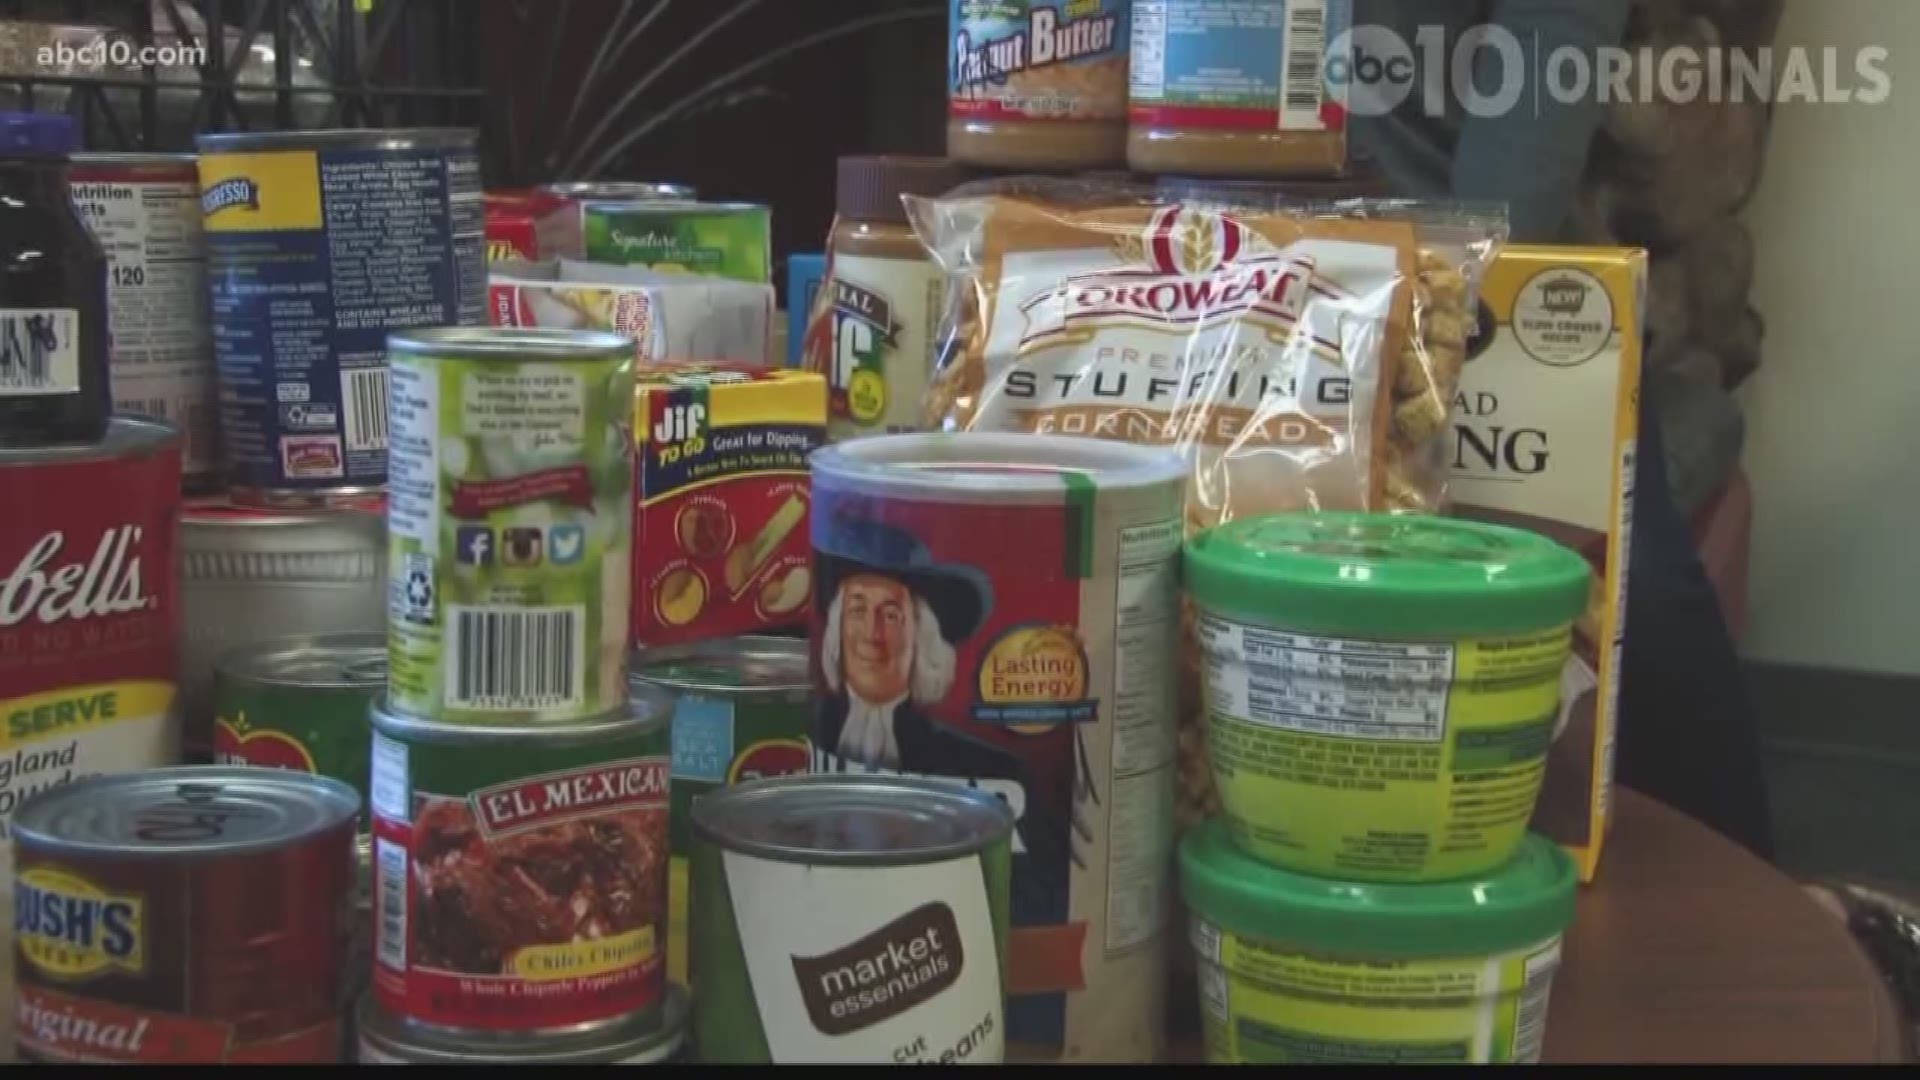 For many people in college, the phrase "starving student" can hit close to home. Now, students at Sierra College in Rocklin are trying to make sure no one on campus has to go hungry.